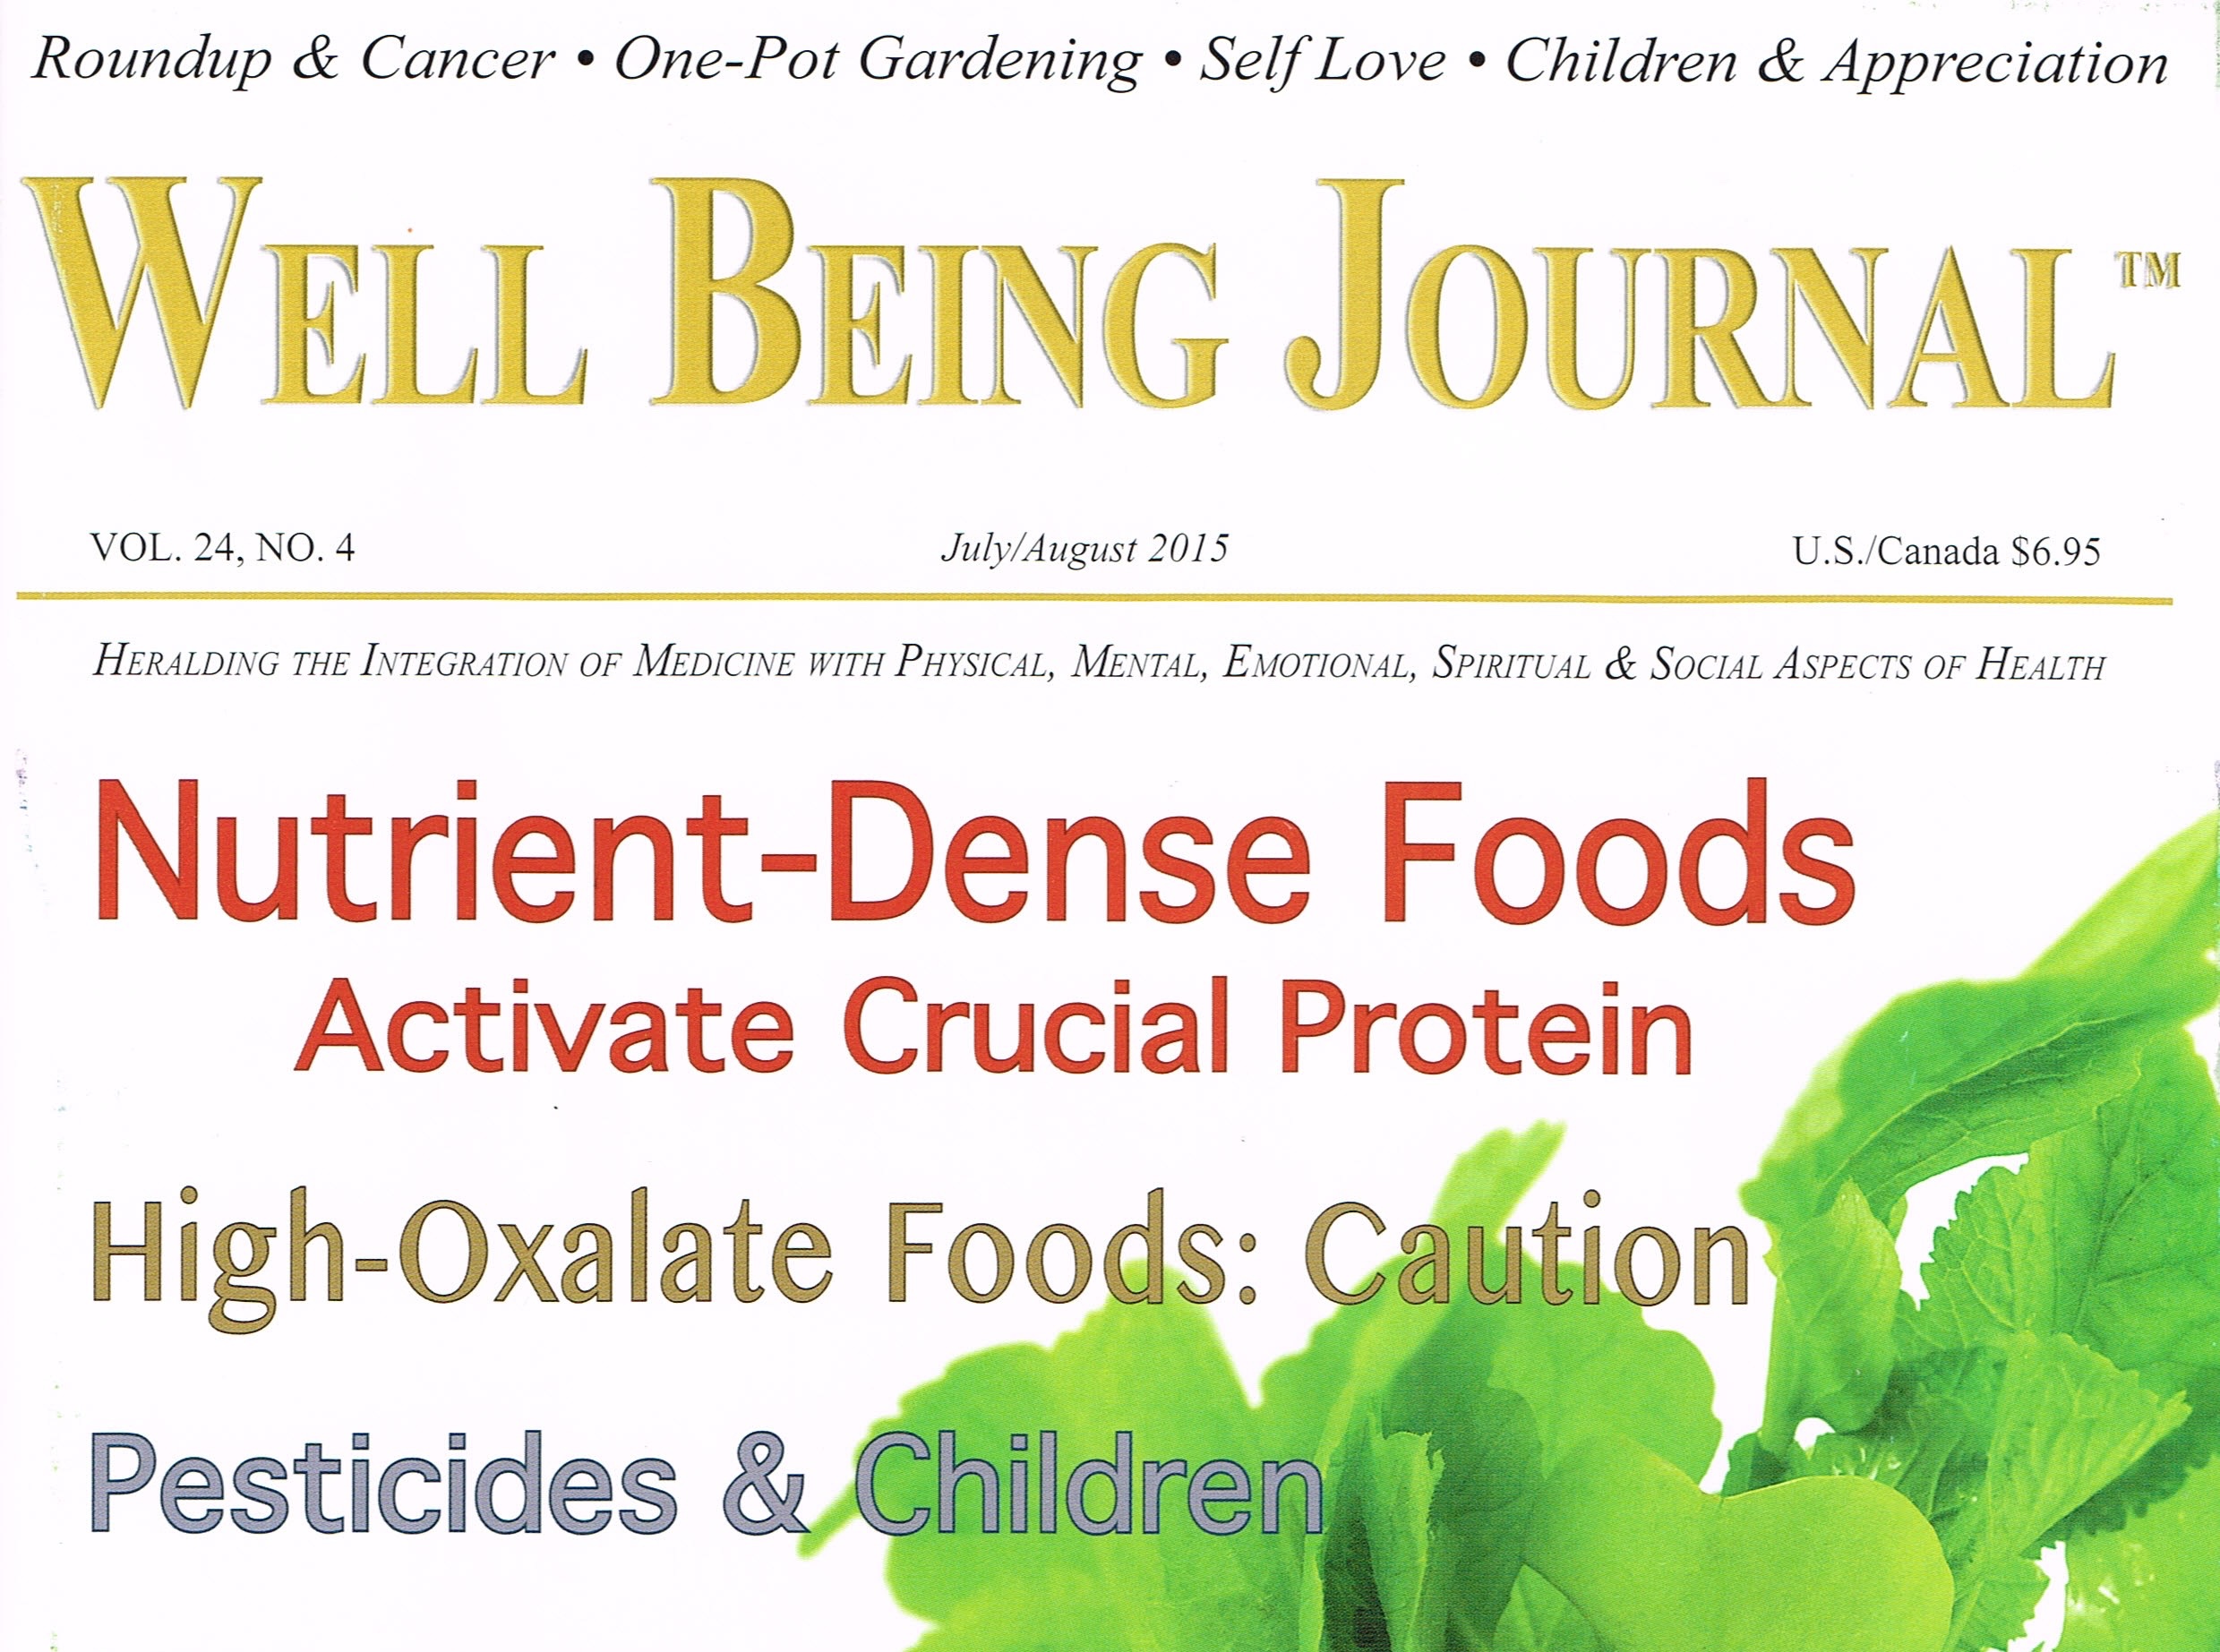 Norton, S. "When Healthy Isn’t: The Risks of High Oxalate Foods." Well Being Journal. 24:4; pp. 16-24; (2015).